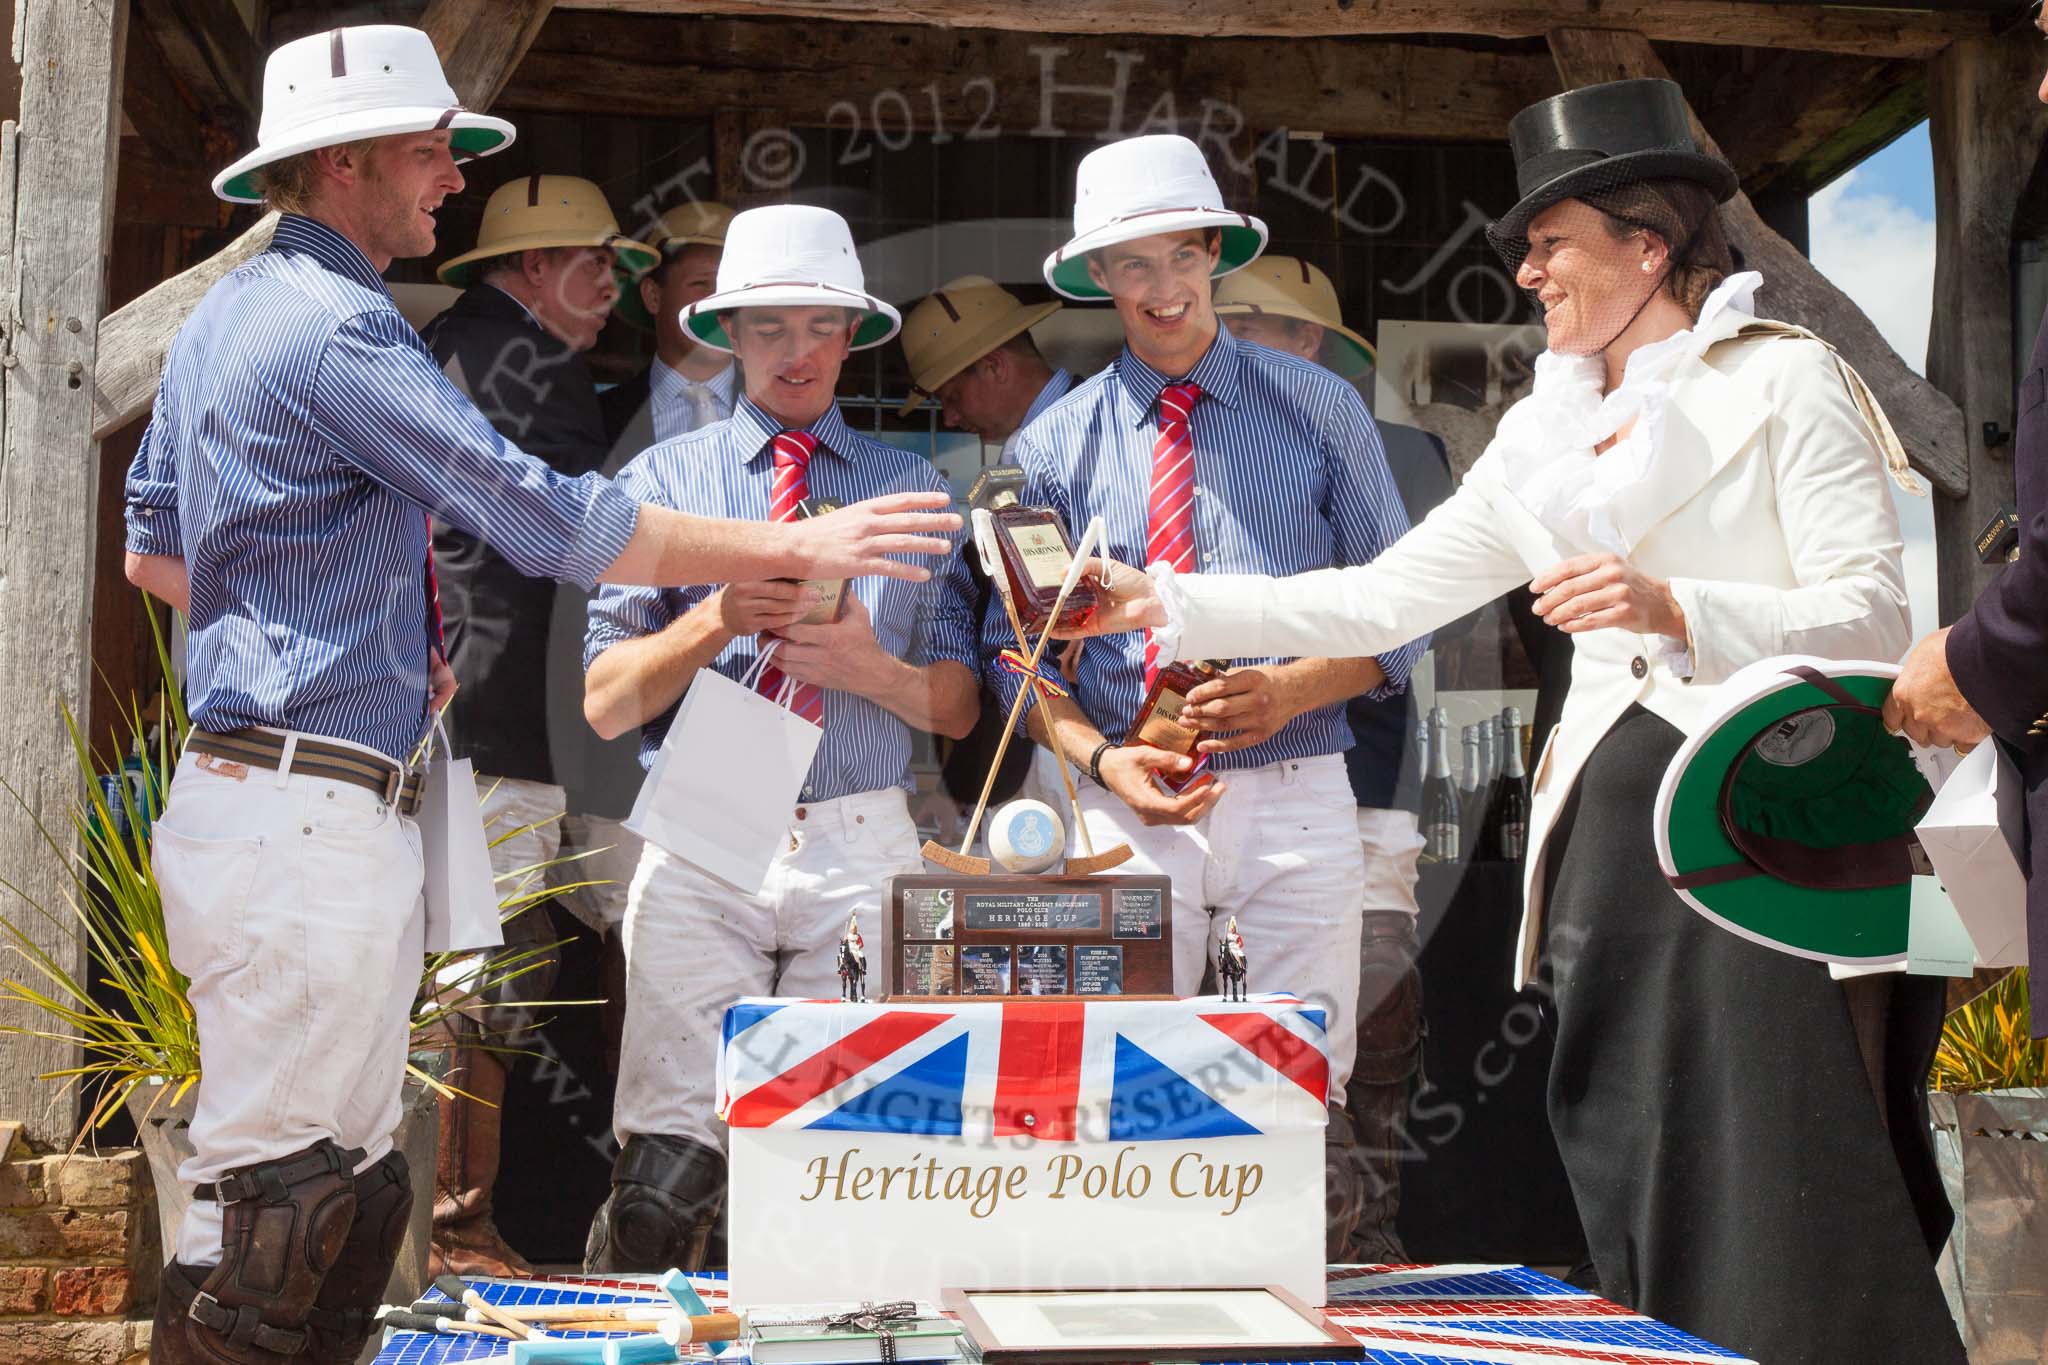 7th Heritage Polo Cup finals: Founder of HERITAGE POLO Barbara P Zingg presenting Silver Fox USA Polo Team with a bottle of 'Amaretto di Saronno'..
Hurtwood Park Polo Club,
Ewhurst Green,
Surrey,
United Kingdom,
on 05 August 2012 at 14:44, image #100